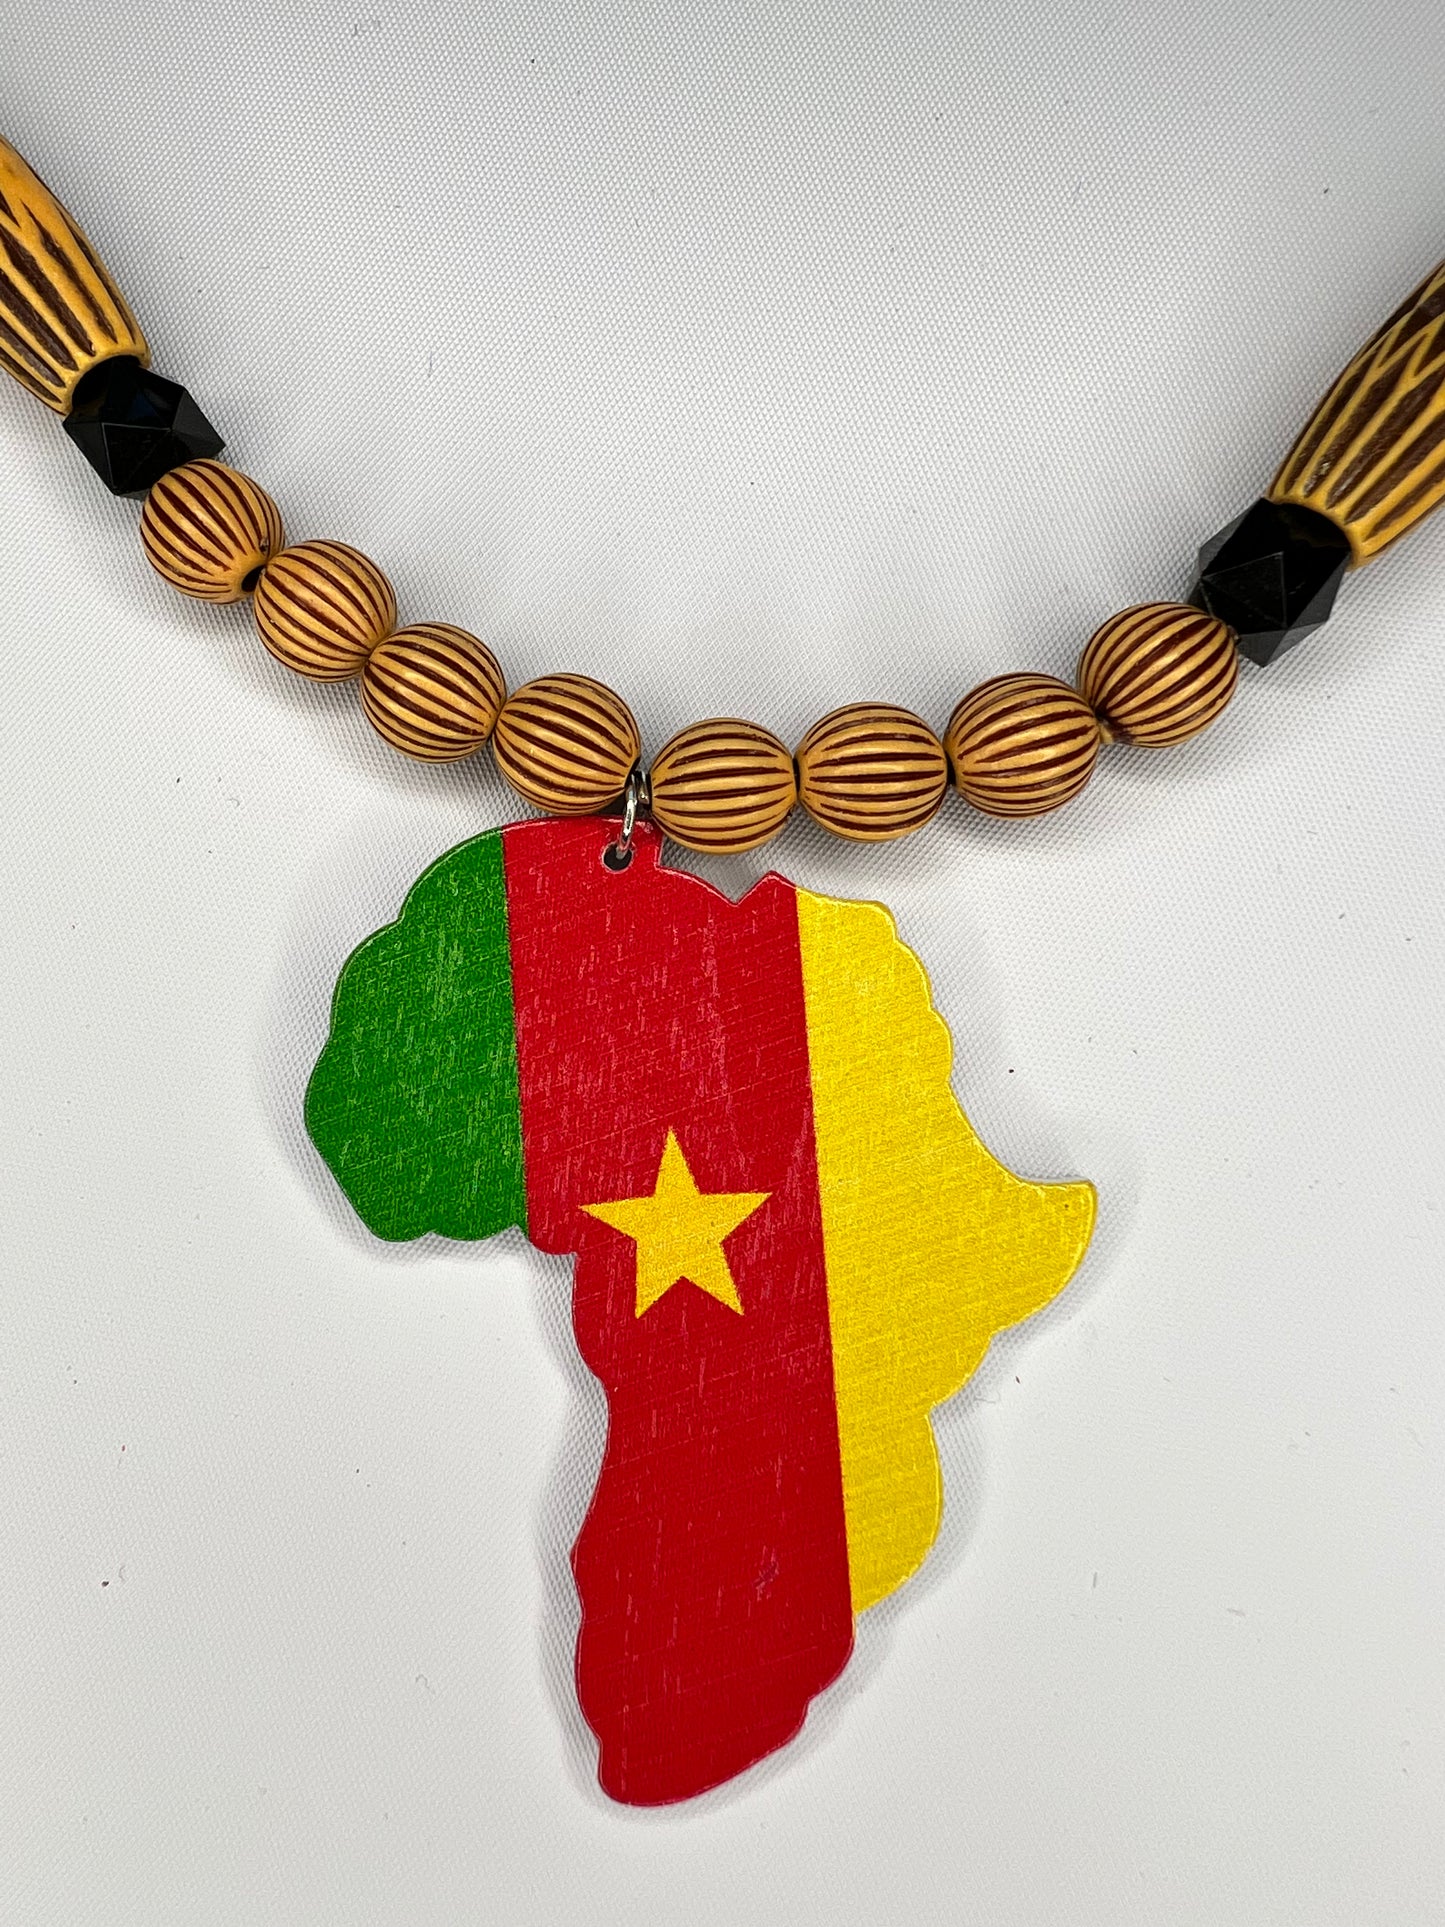 African Map with Cameroon flag color jewelry